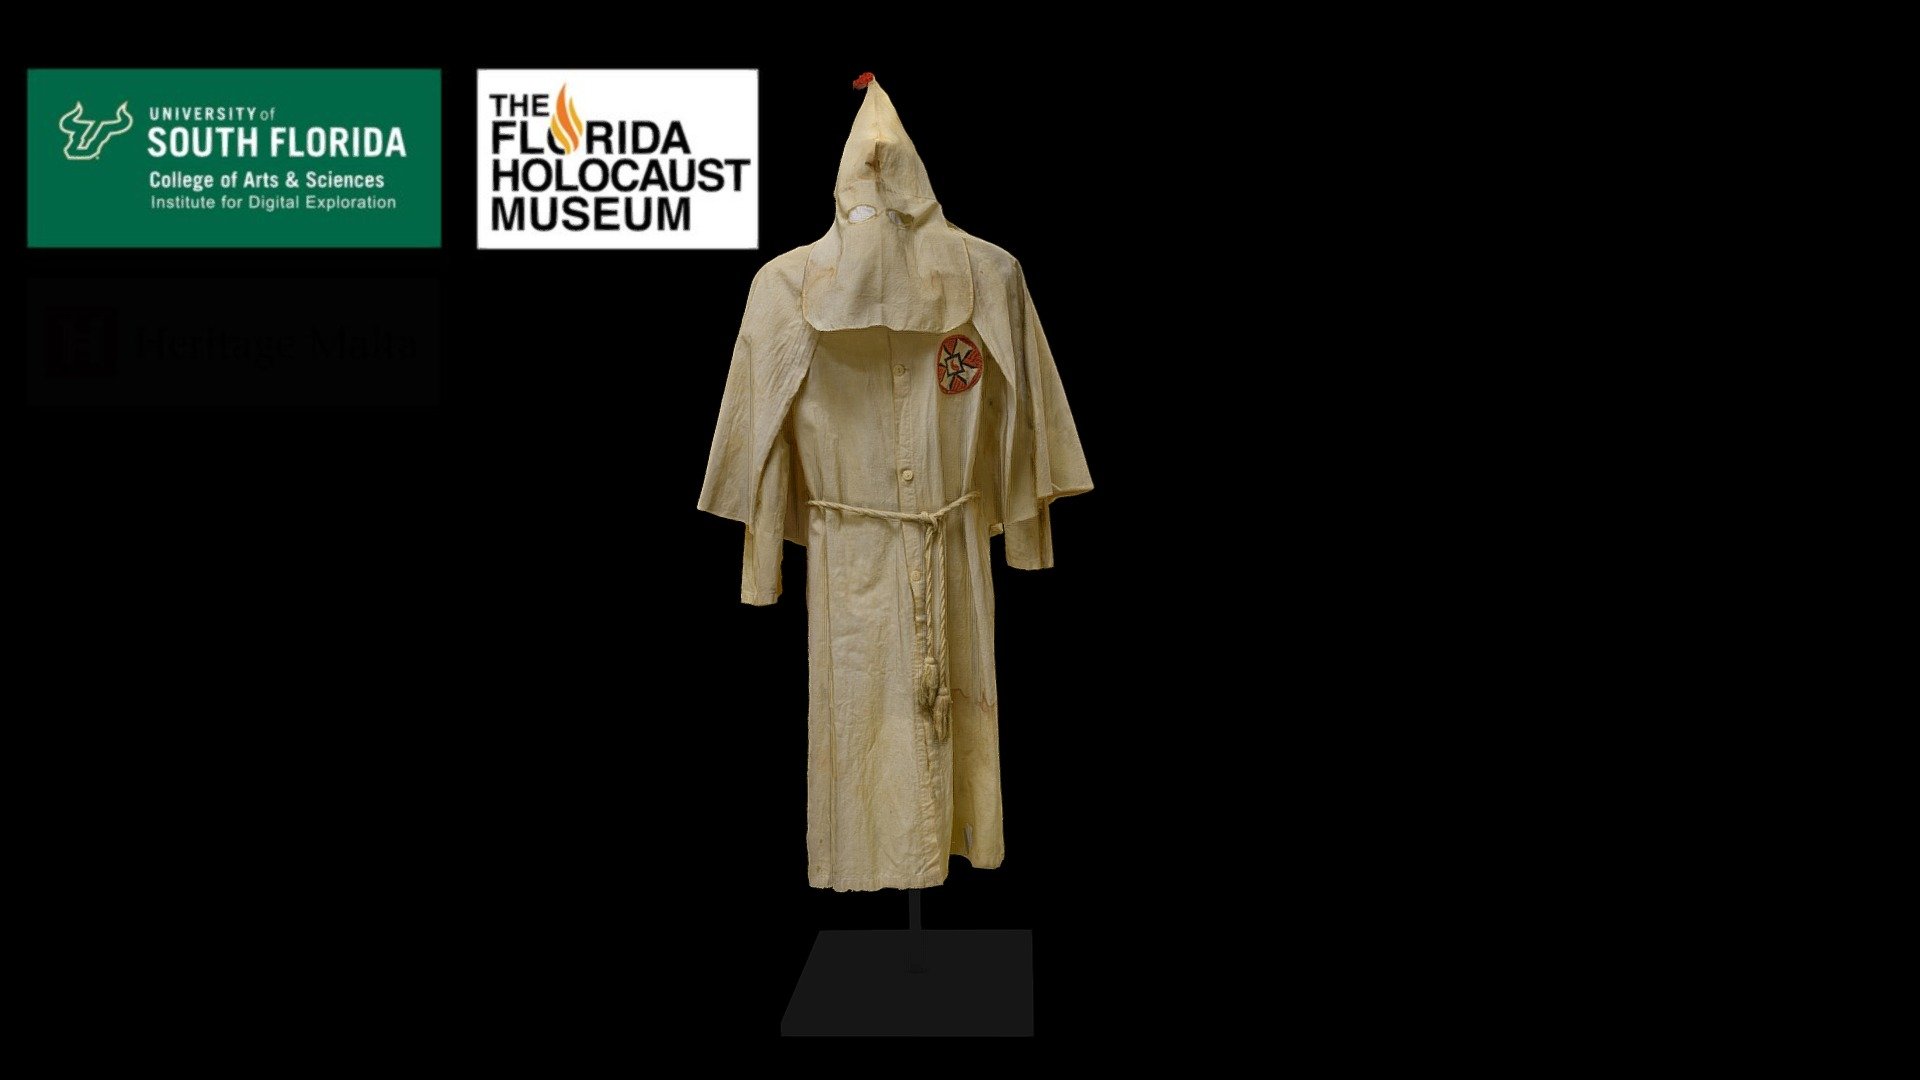 Ku Klux Klan Robe and Hood

(Permanent collection of The Florida Holocaust Museum) 

In 1937, over 200 Klansmen marched through Black neighborhoods of St. Pete to discourage its citizens from voting in the police chief election and during the same year, kidnapped and “tar and feathered” union organizer Joseph Shoemaker of Tampa. 

Digital exhibition “Beaches, Benches and Boycotts: The Civil Rights Movement in Tampa Bay”

This model was created using 250 images processed in Agisoft Metashape 1.6.2 3d model